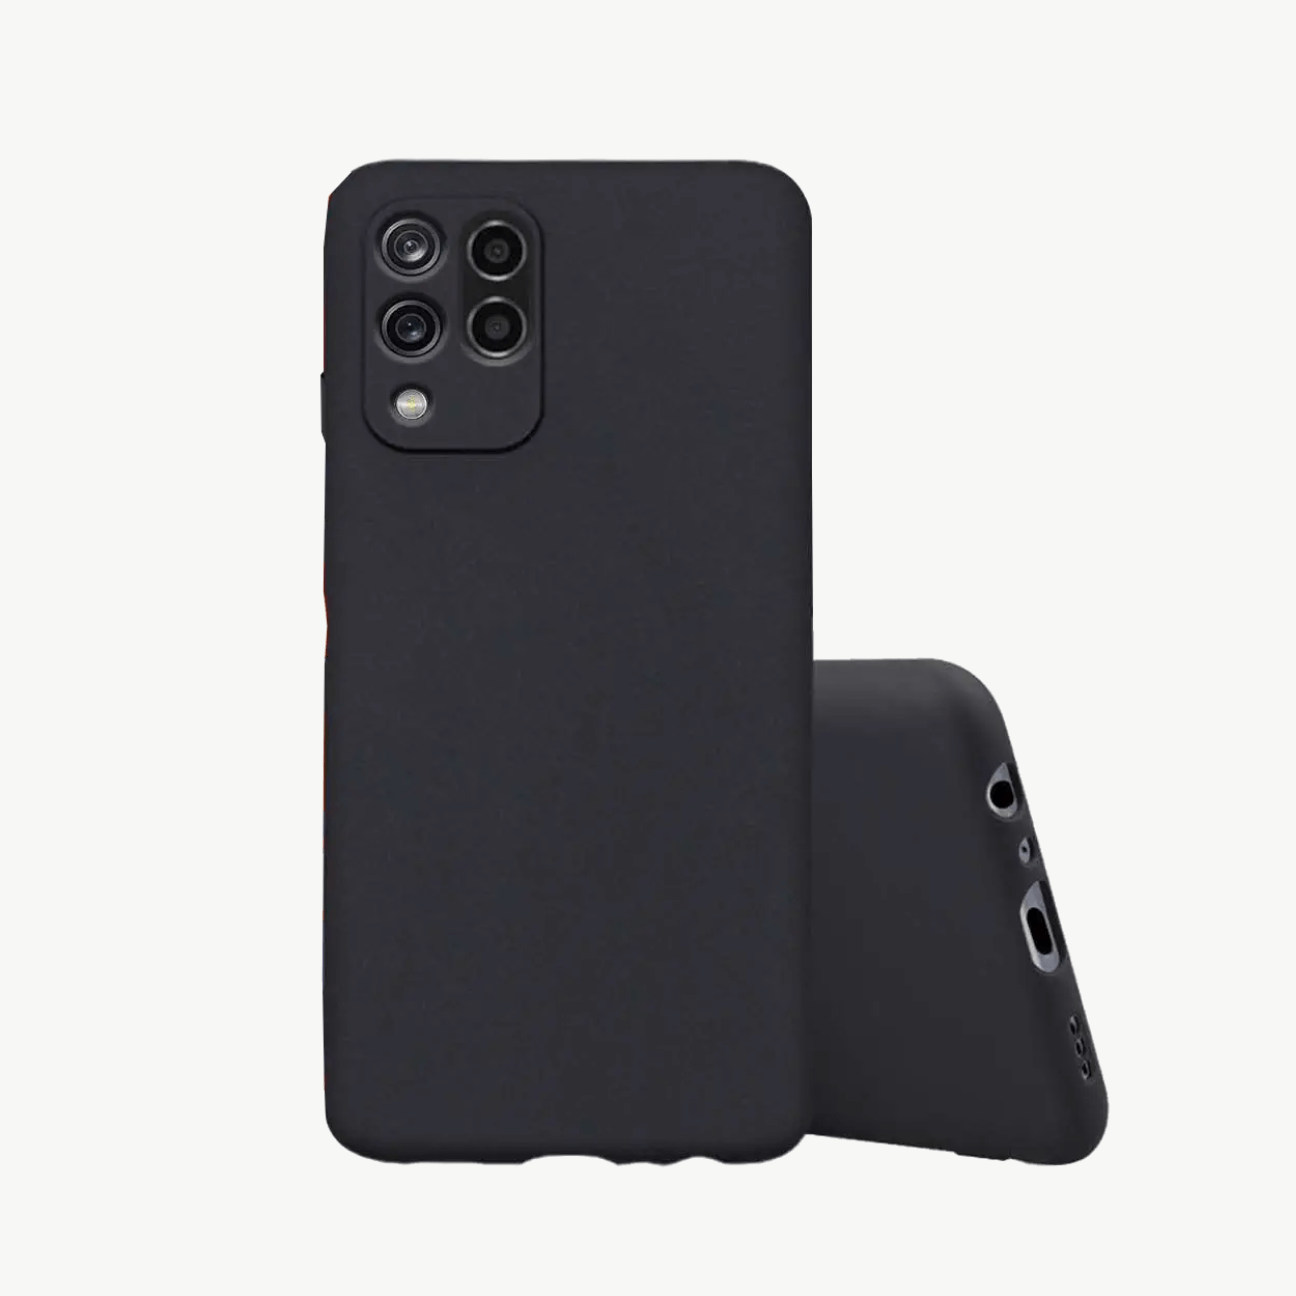 Oppo F5 Youth Black Soft Silicone Phone Case Image